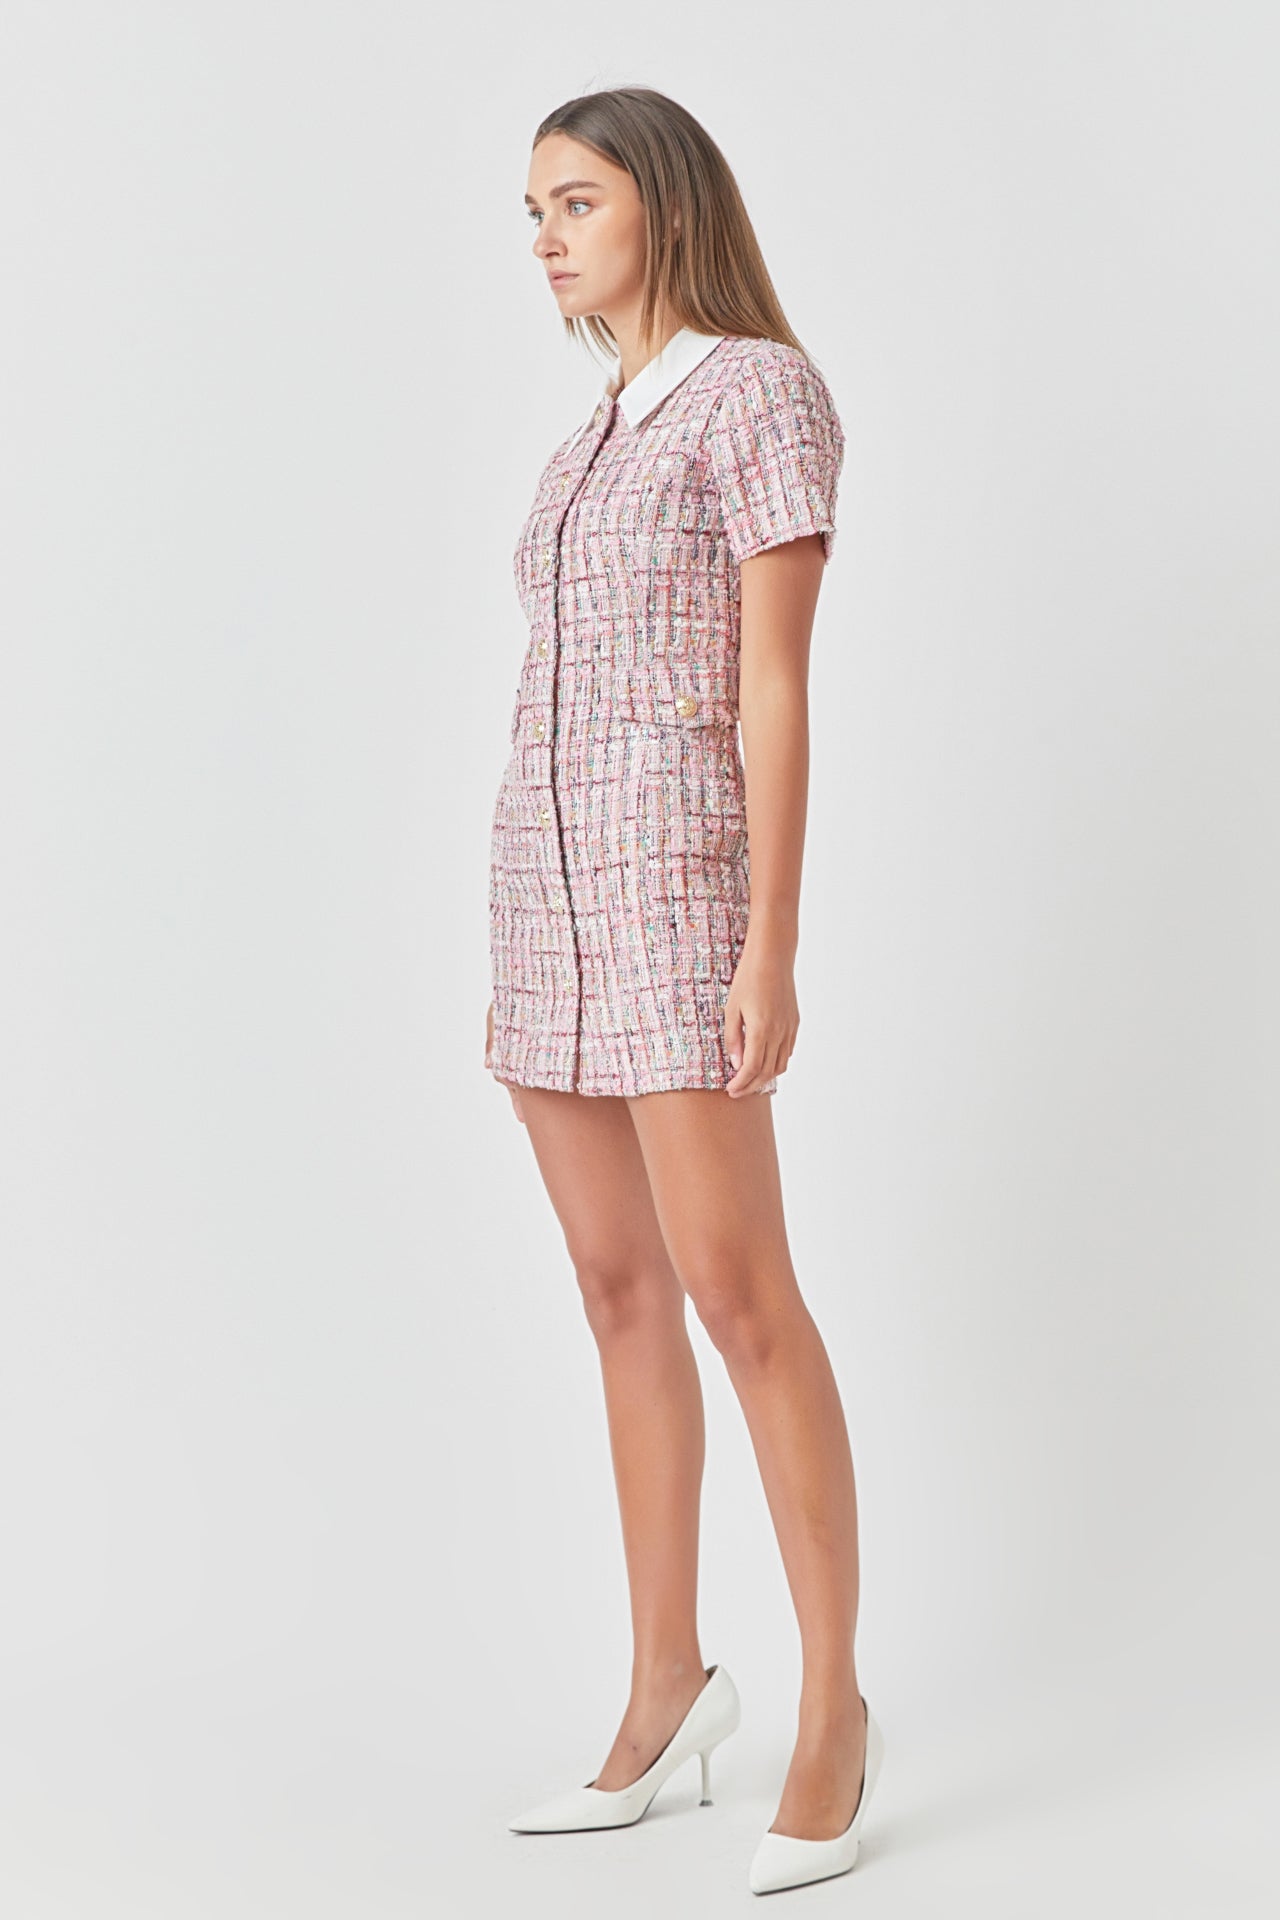 ENDLESS ROSE - Multi Tweed Collared Short Sleeve Dress - DRESSES available at Objectrare